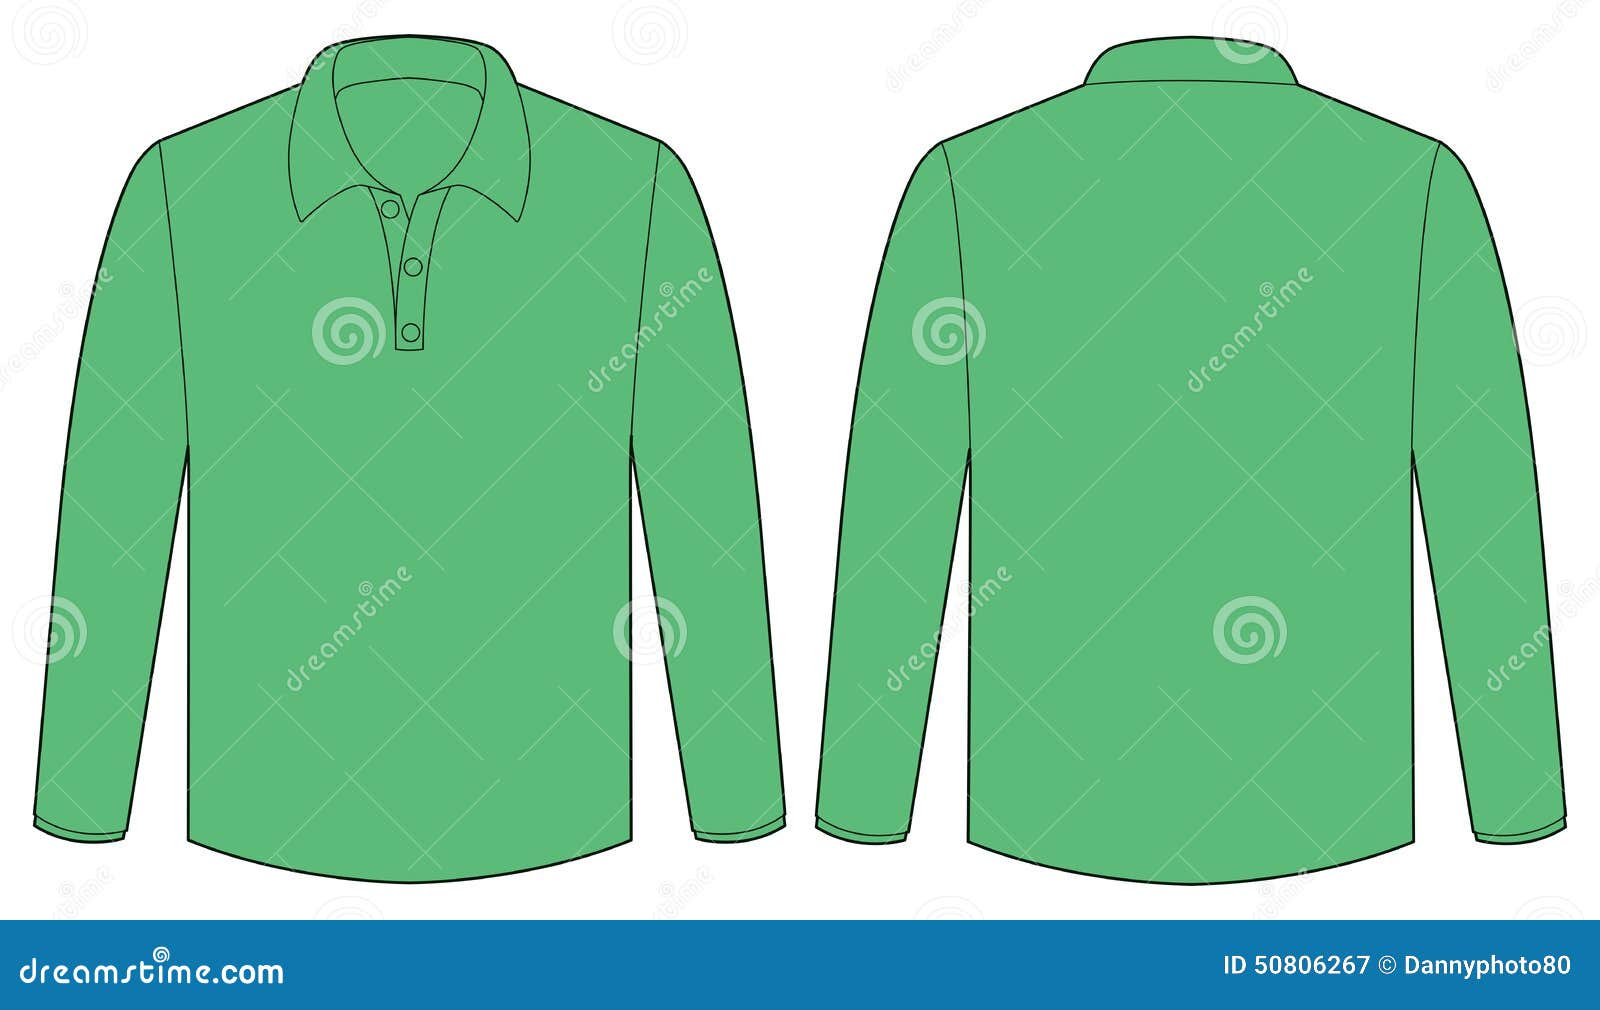 Shirt stock vector. Illustration of clothes, isolated - 50806267